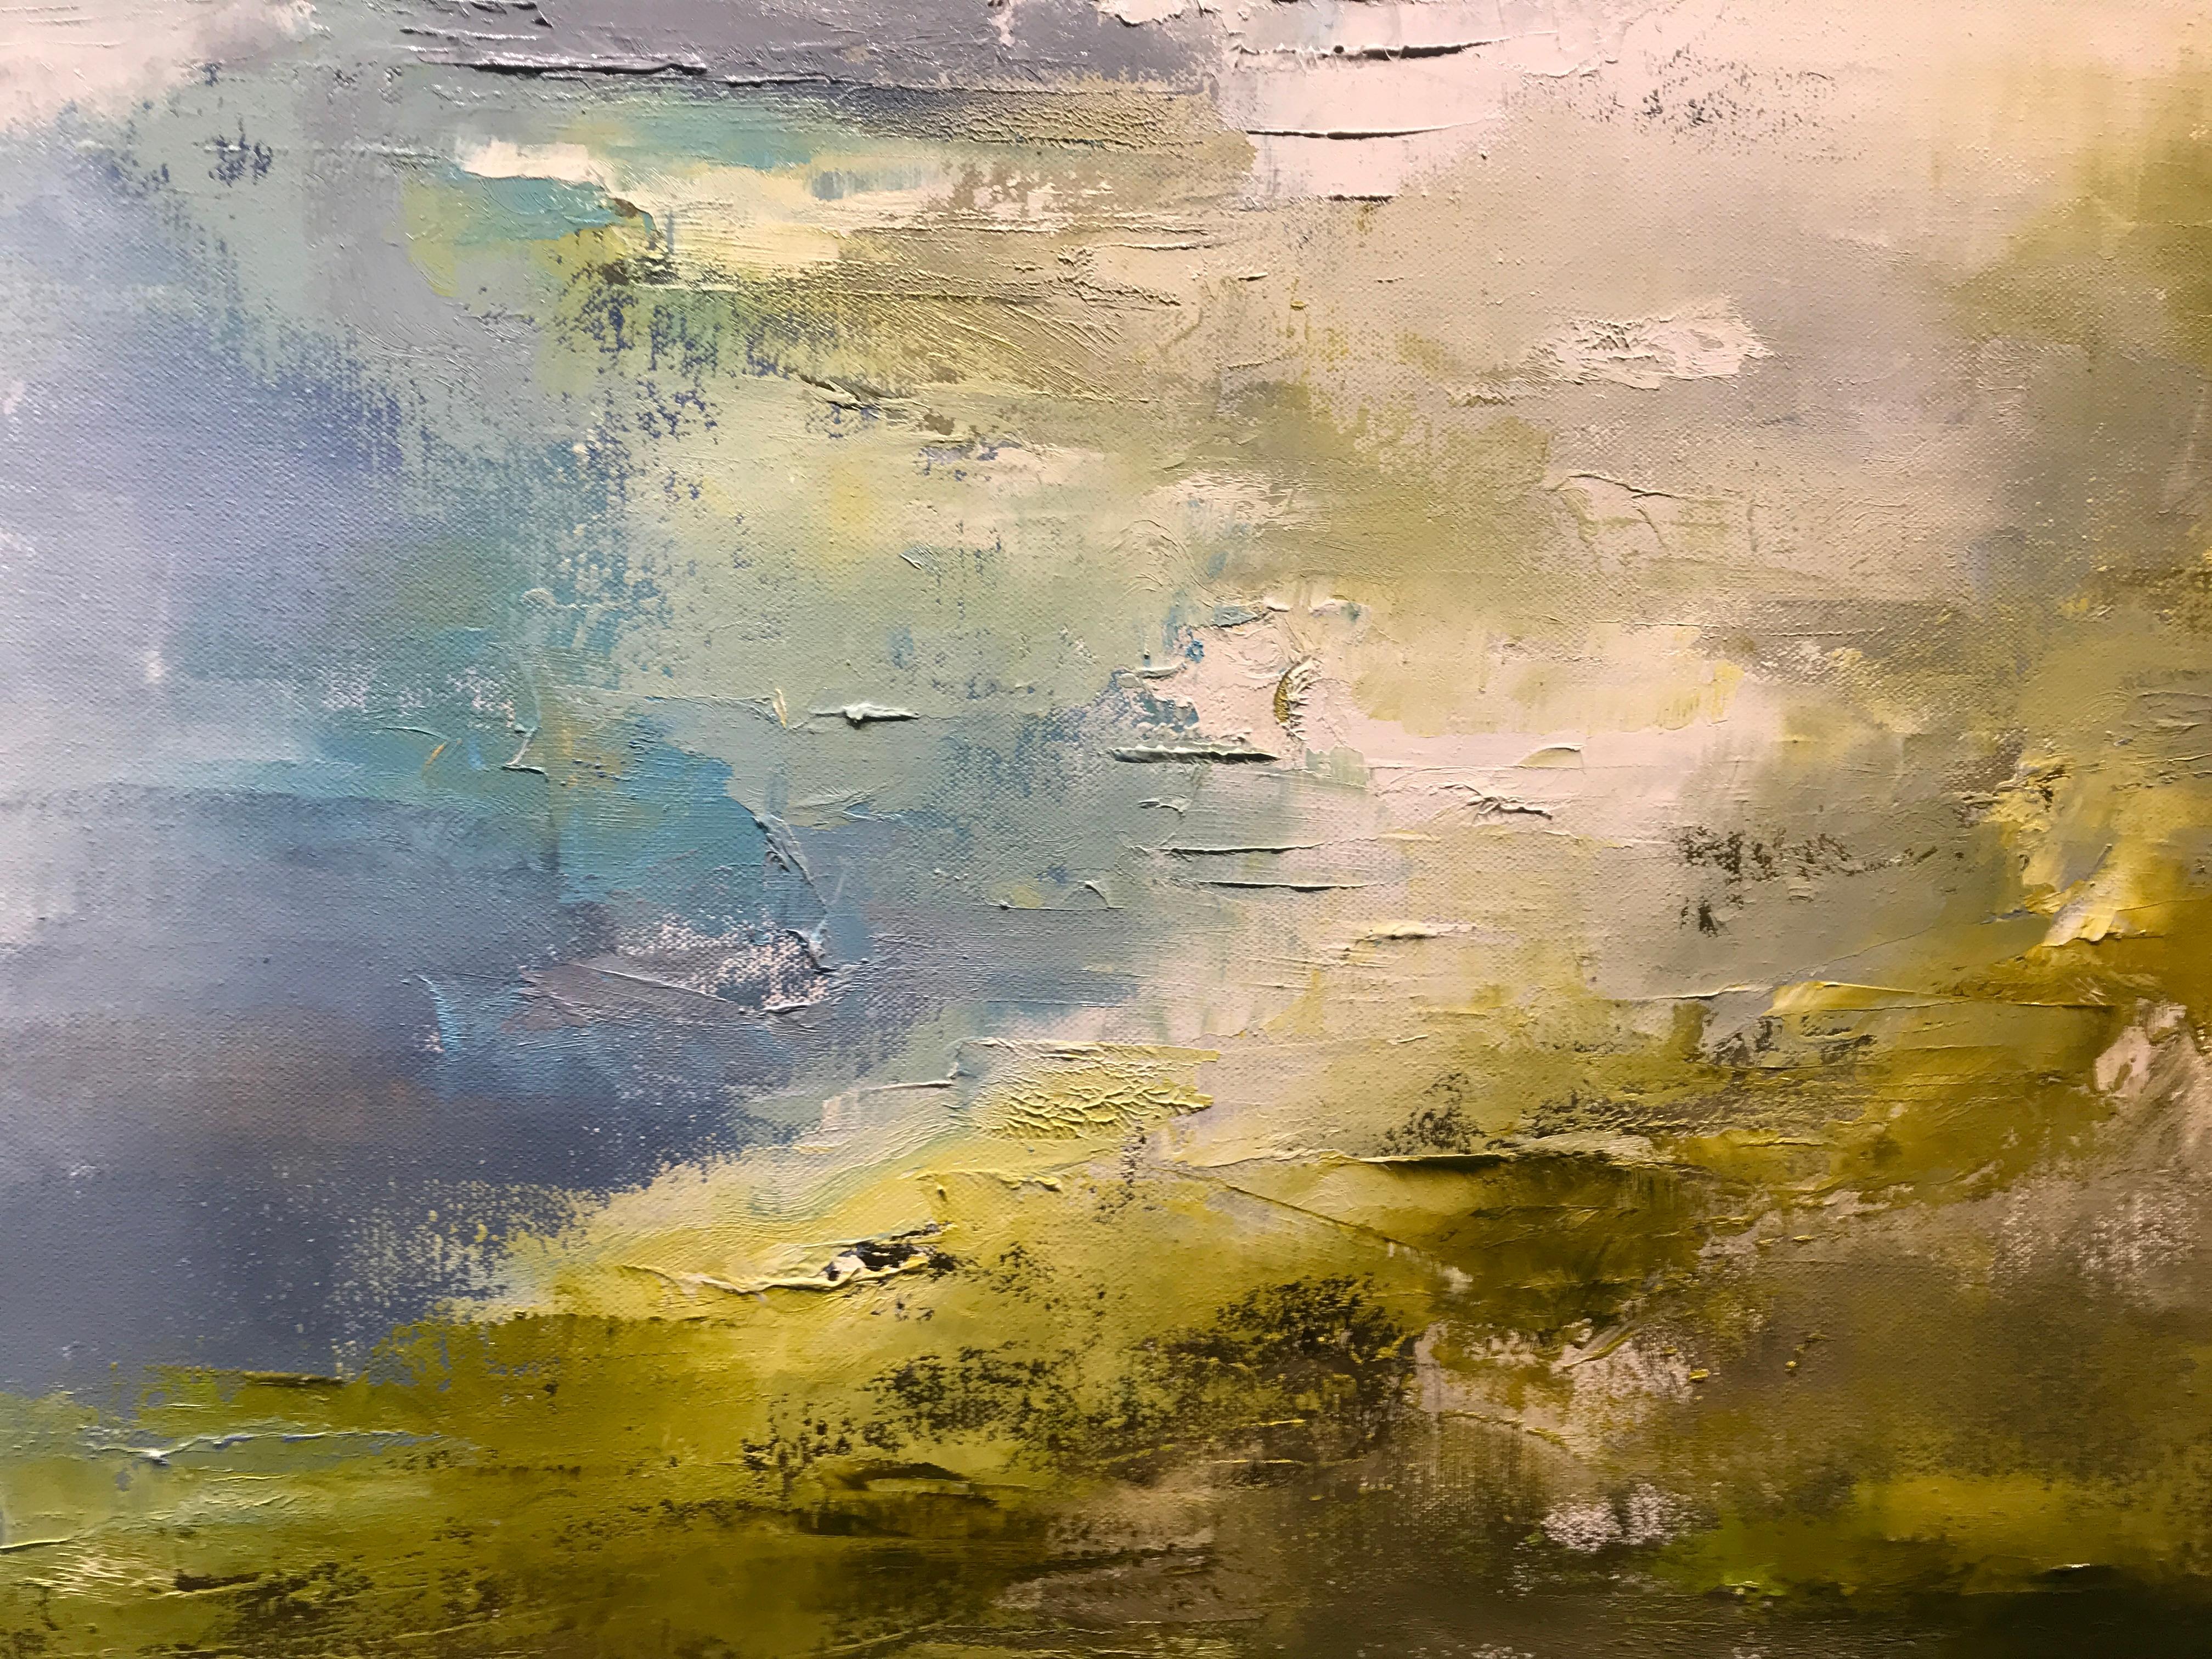 Shimmering Harbor by Heidi Kirschner, Square Abstract Oil on Canvas Painting 4